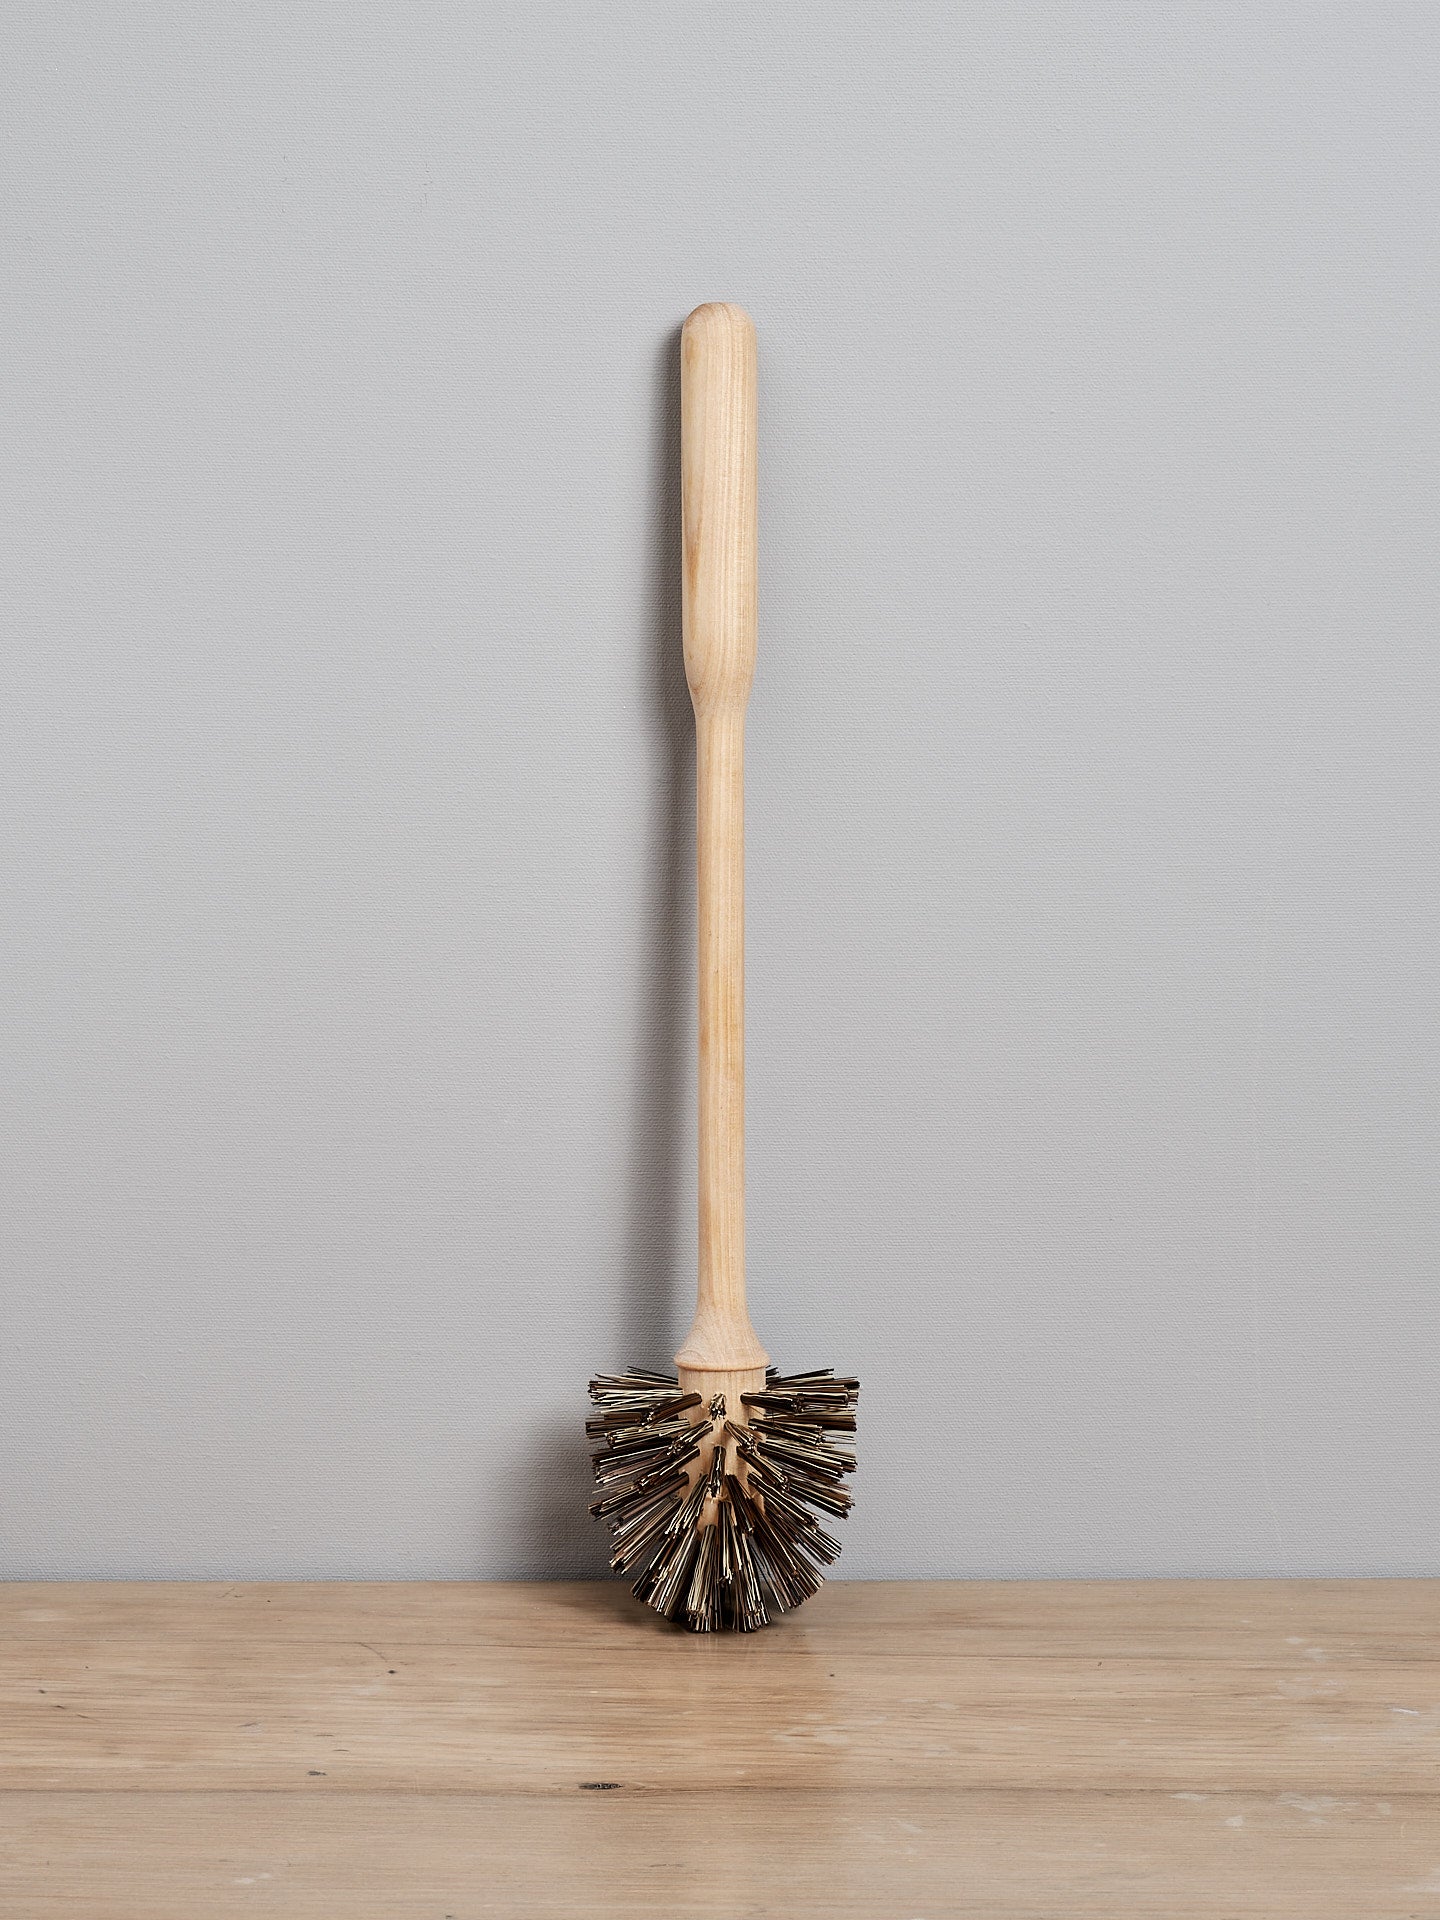 A Toilet Brush - Replacement by Iris Hantverk sitting on top of a wooden table.